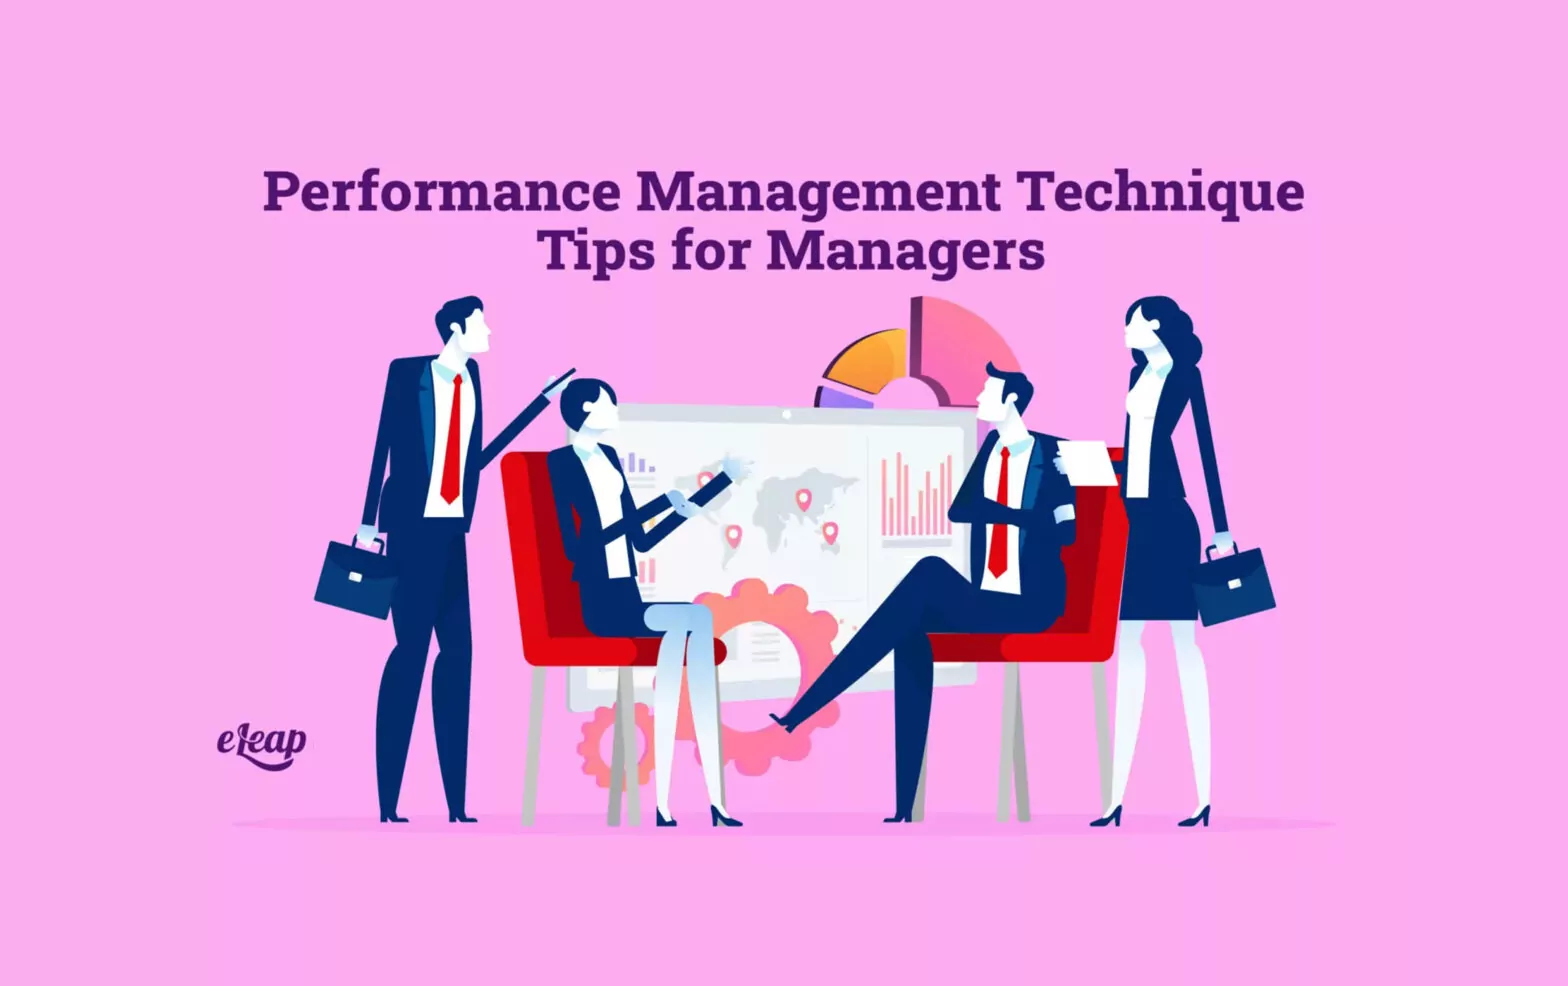 Performance Management Technique Tips for Managers